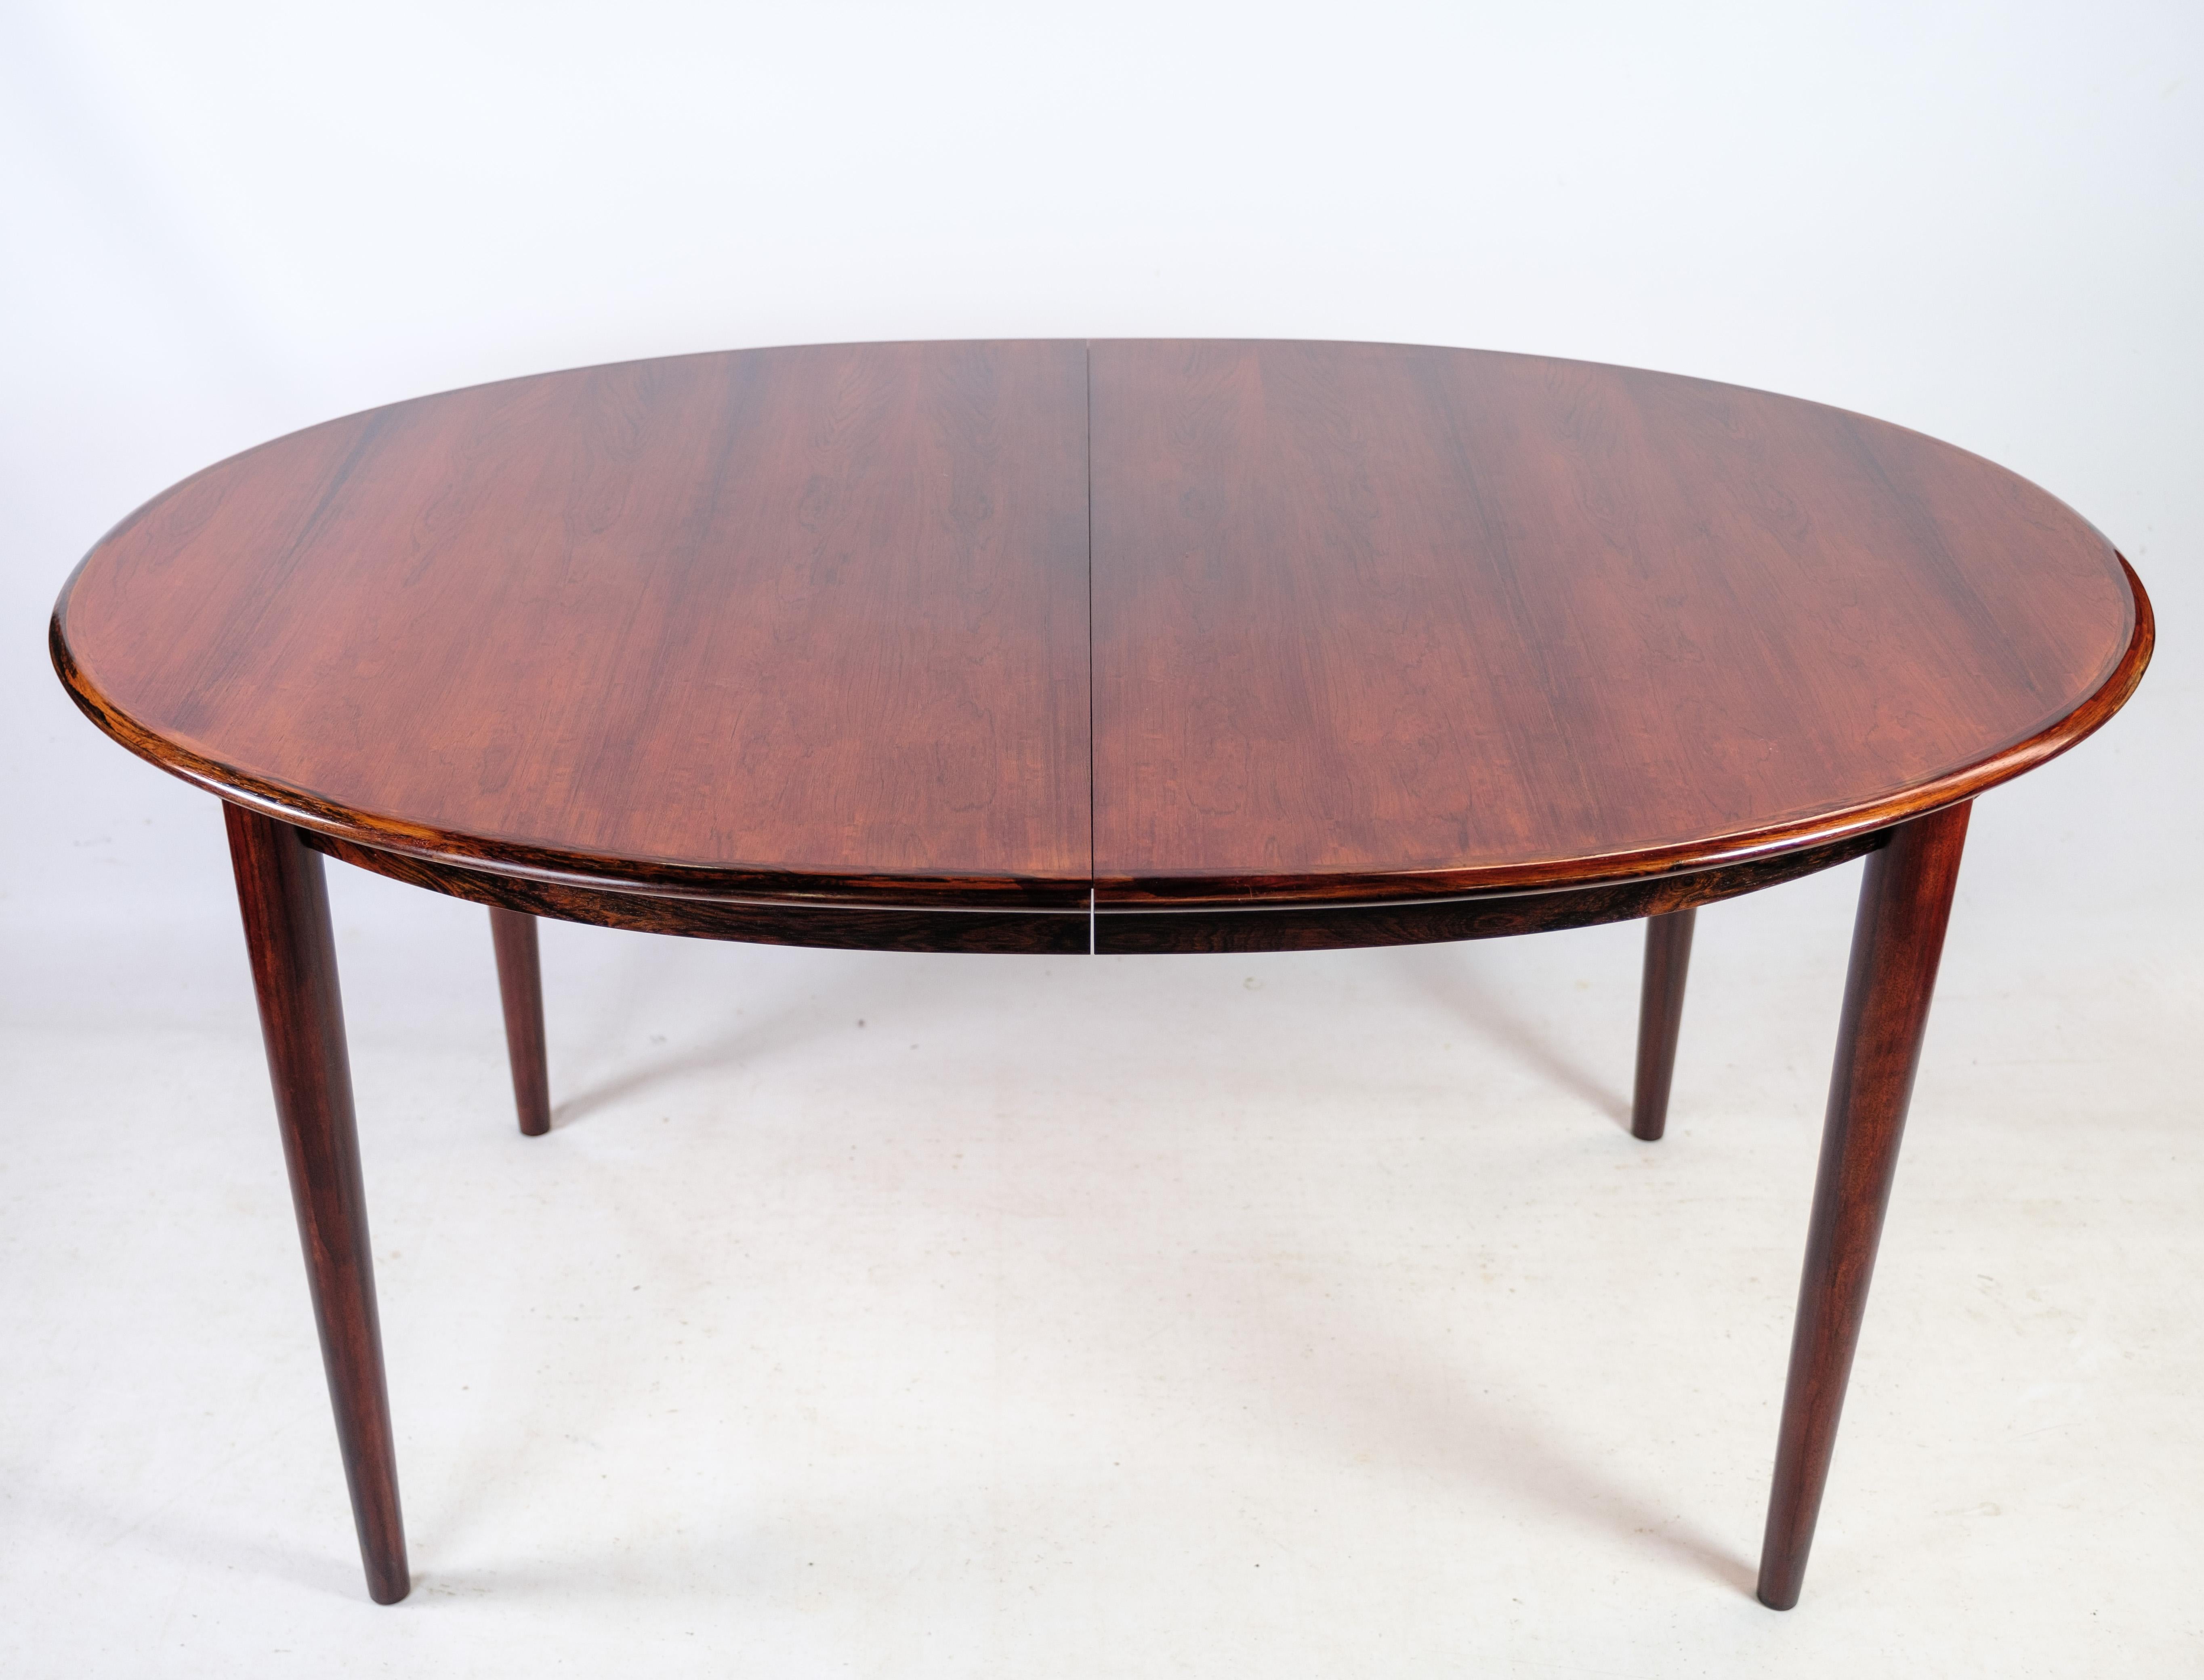 Mid-Century Modern Dining Table Made In Rosewood By Arne Vodder From 1960s For Sale